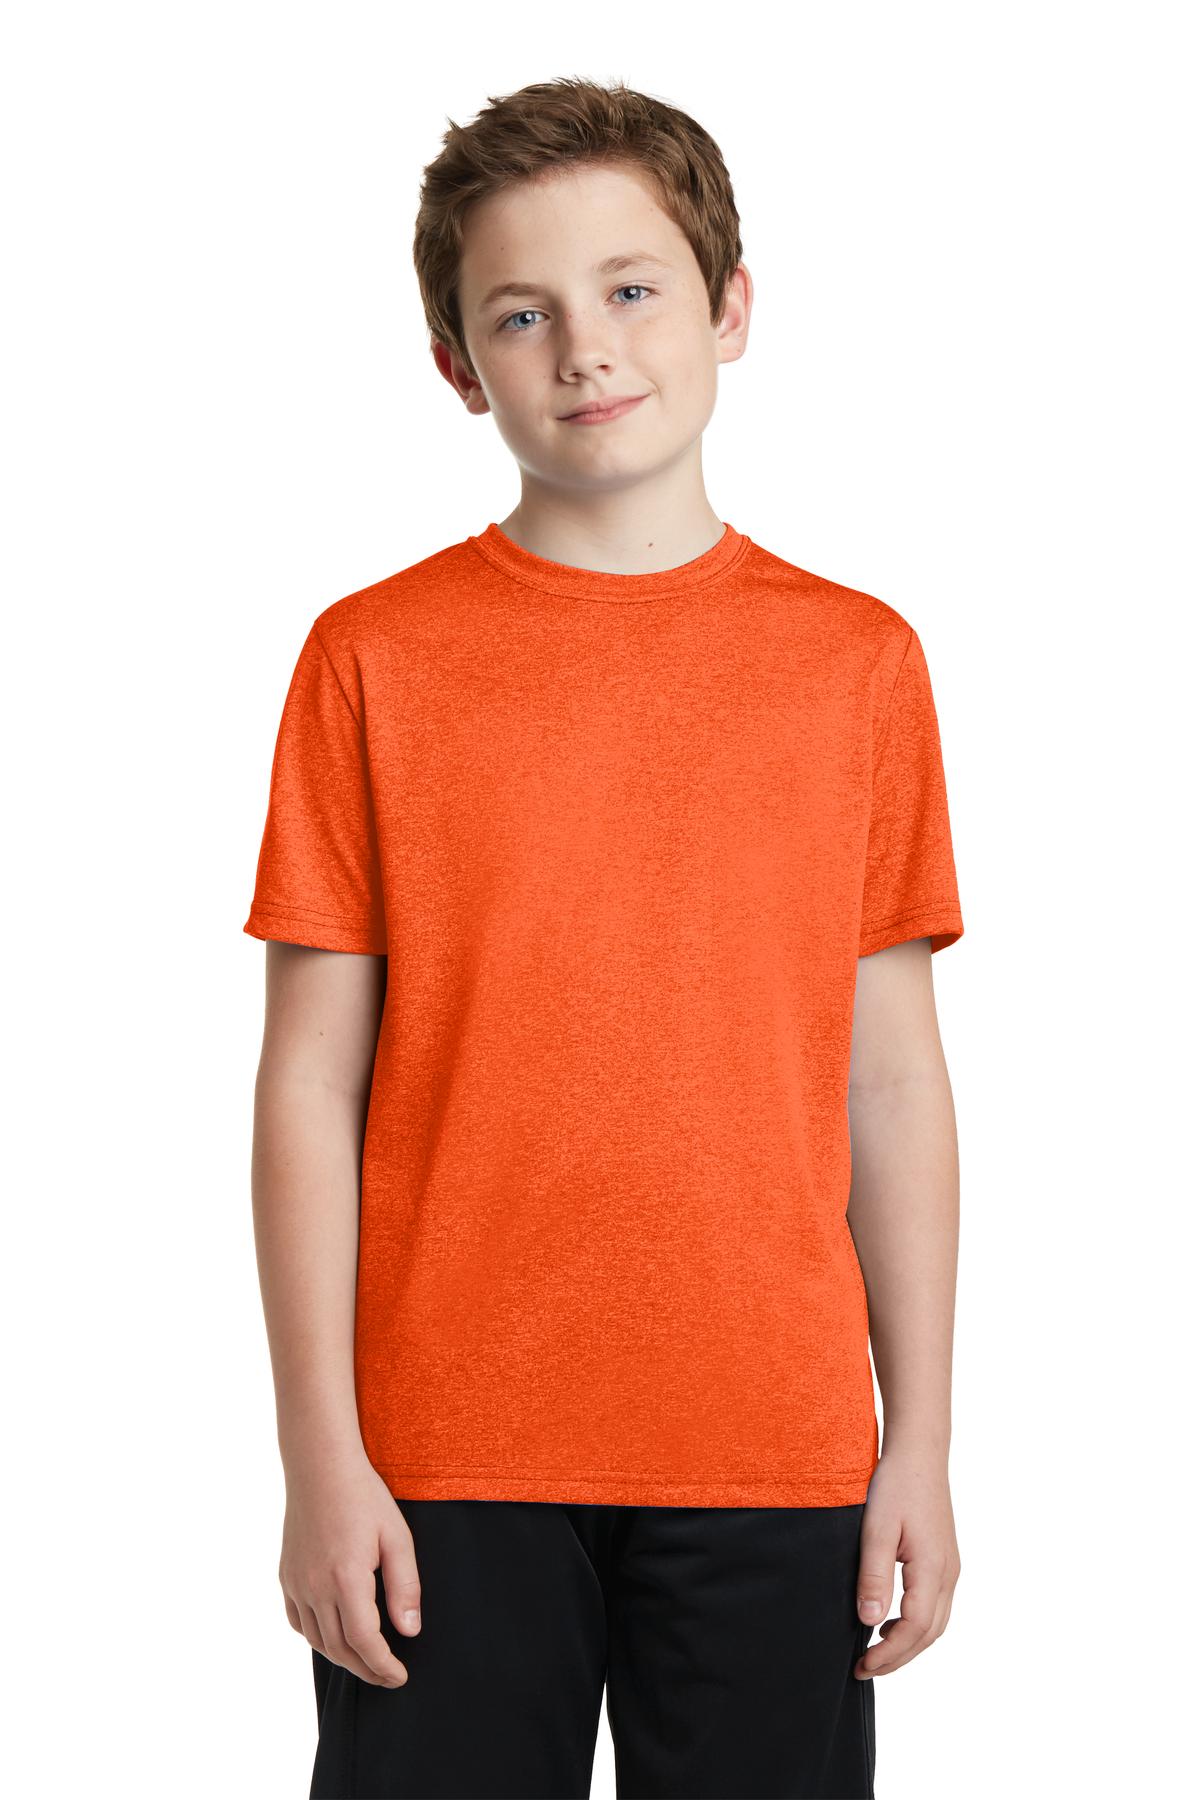 Sport-Tek Activewear Youth T-Shirts for Hospitality ® Youth Heather Contender Tee.-Sport-Tek